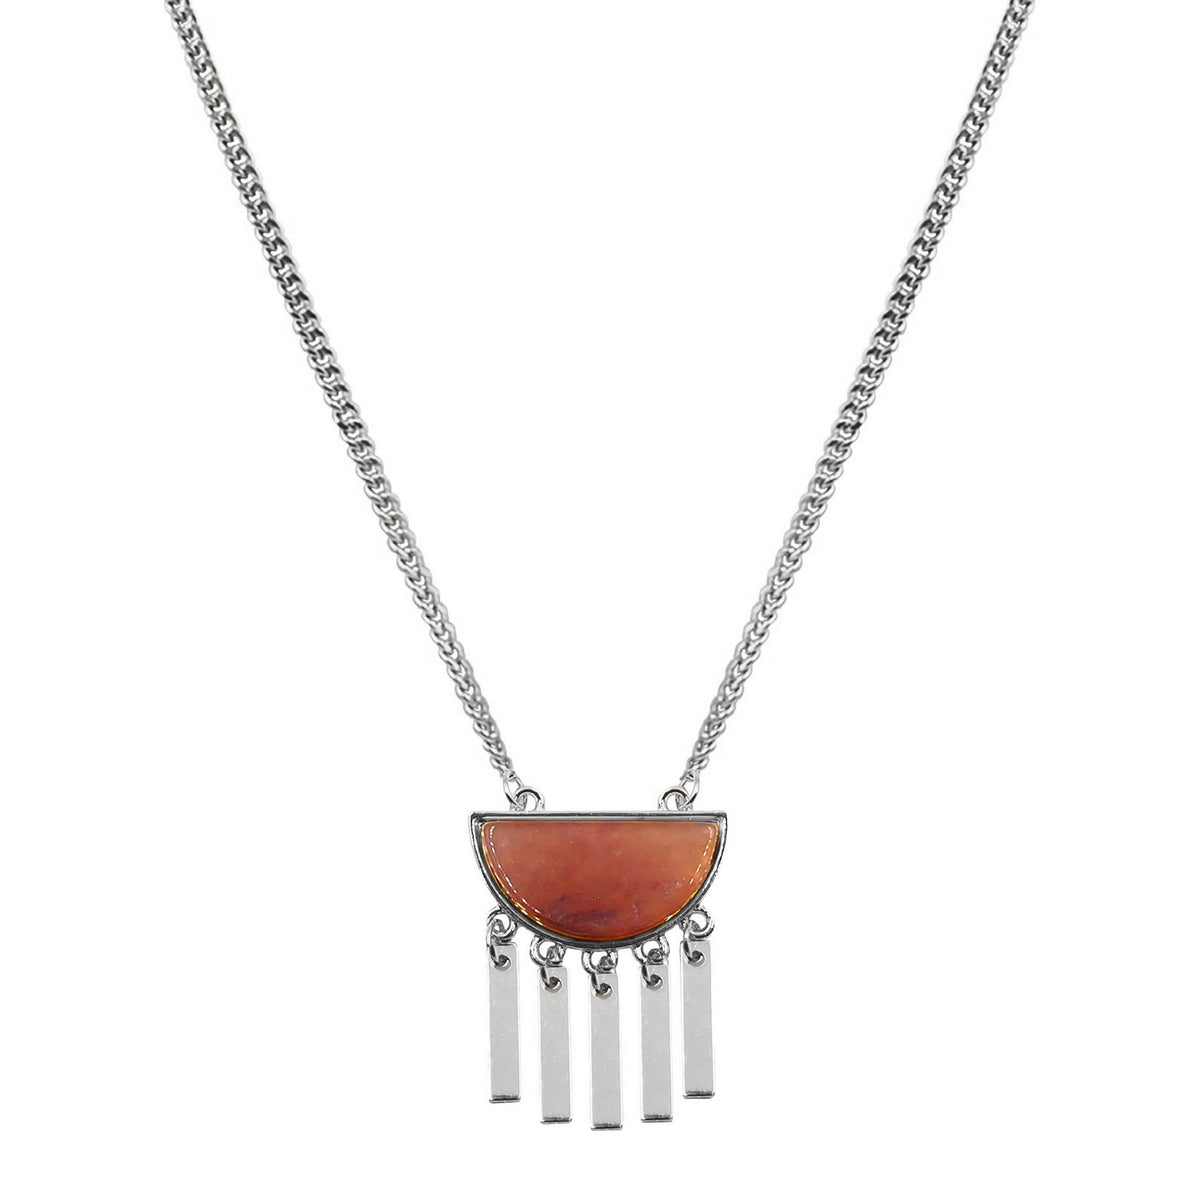 Bianca Collection - Silver Aragonite Necklace (Limited Edition) fine designer jewelry for men and women